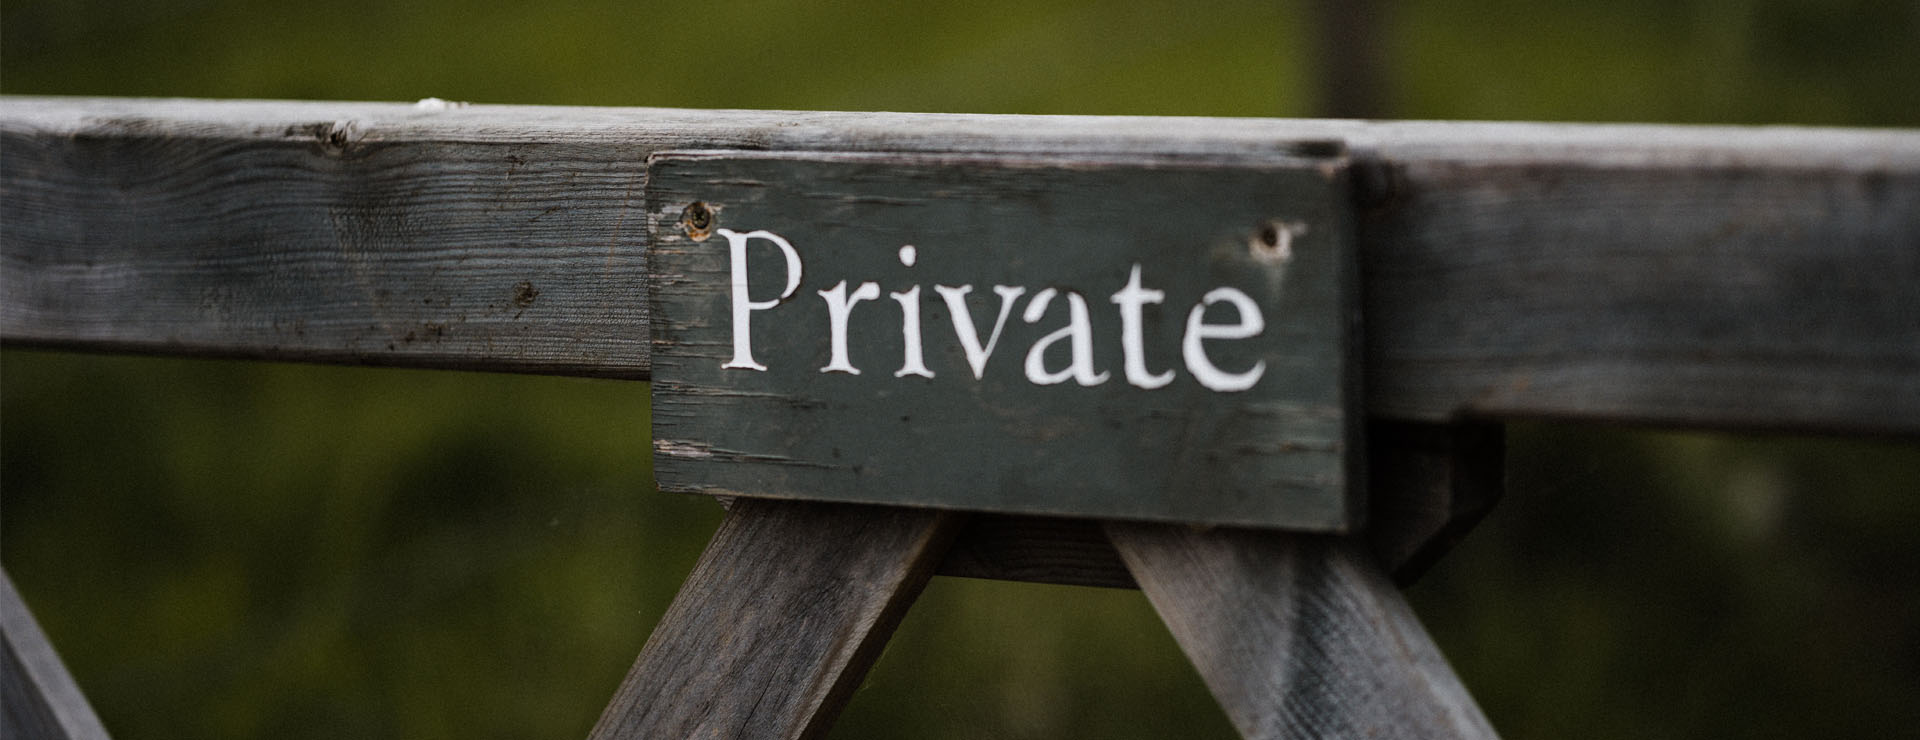 Photo of a gate with a sign saying "Private" on it